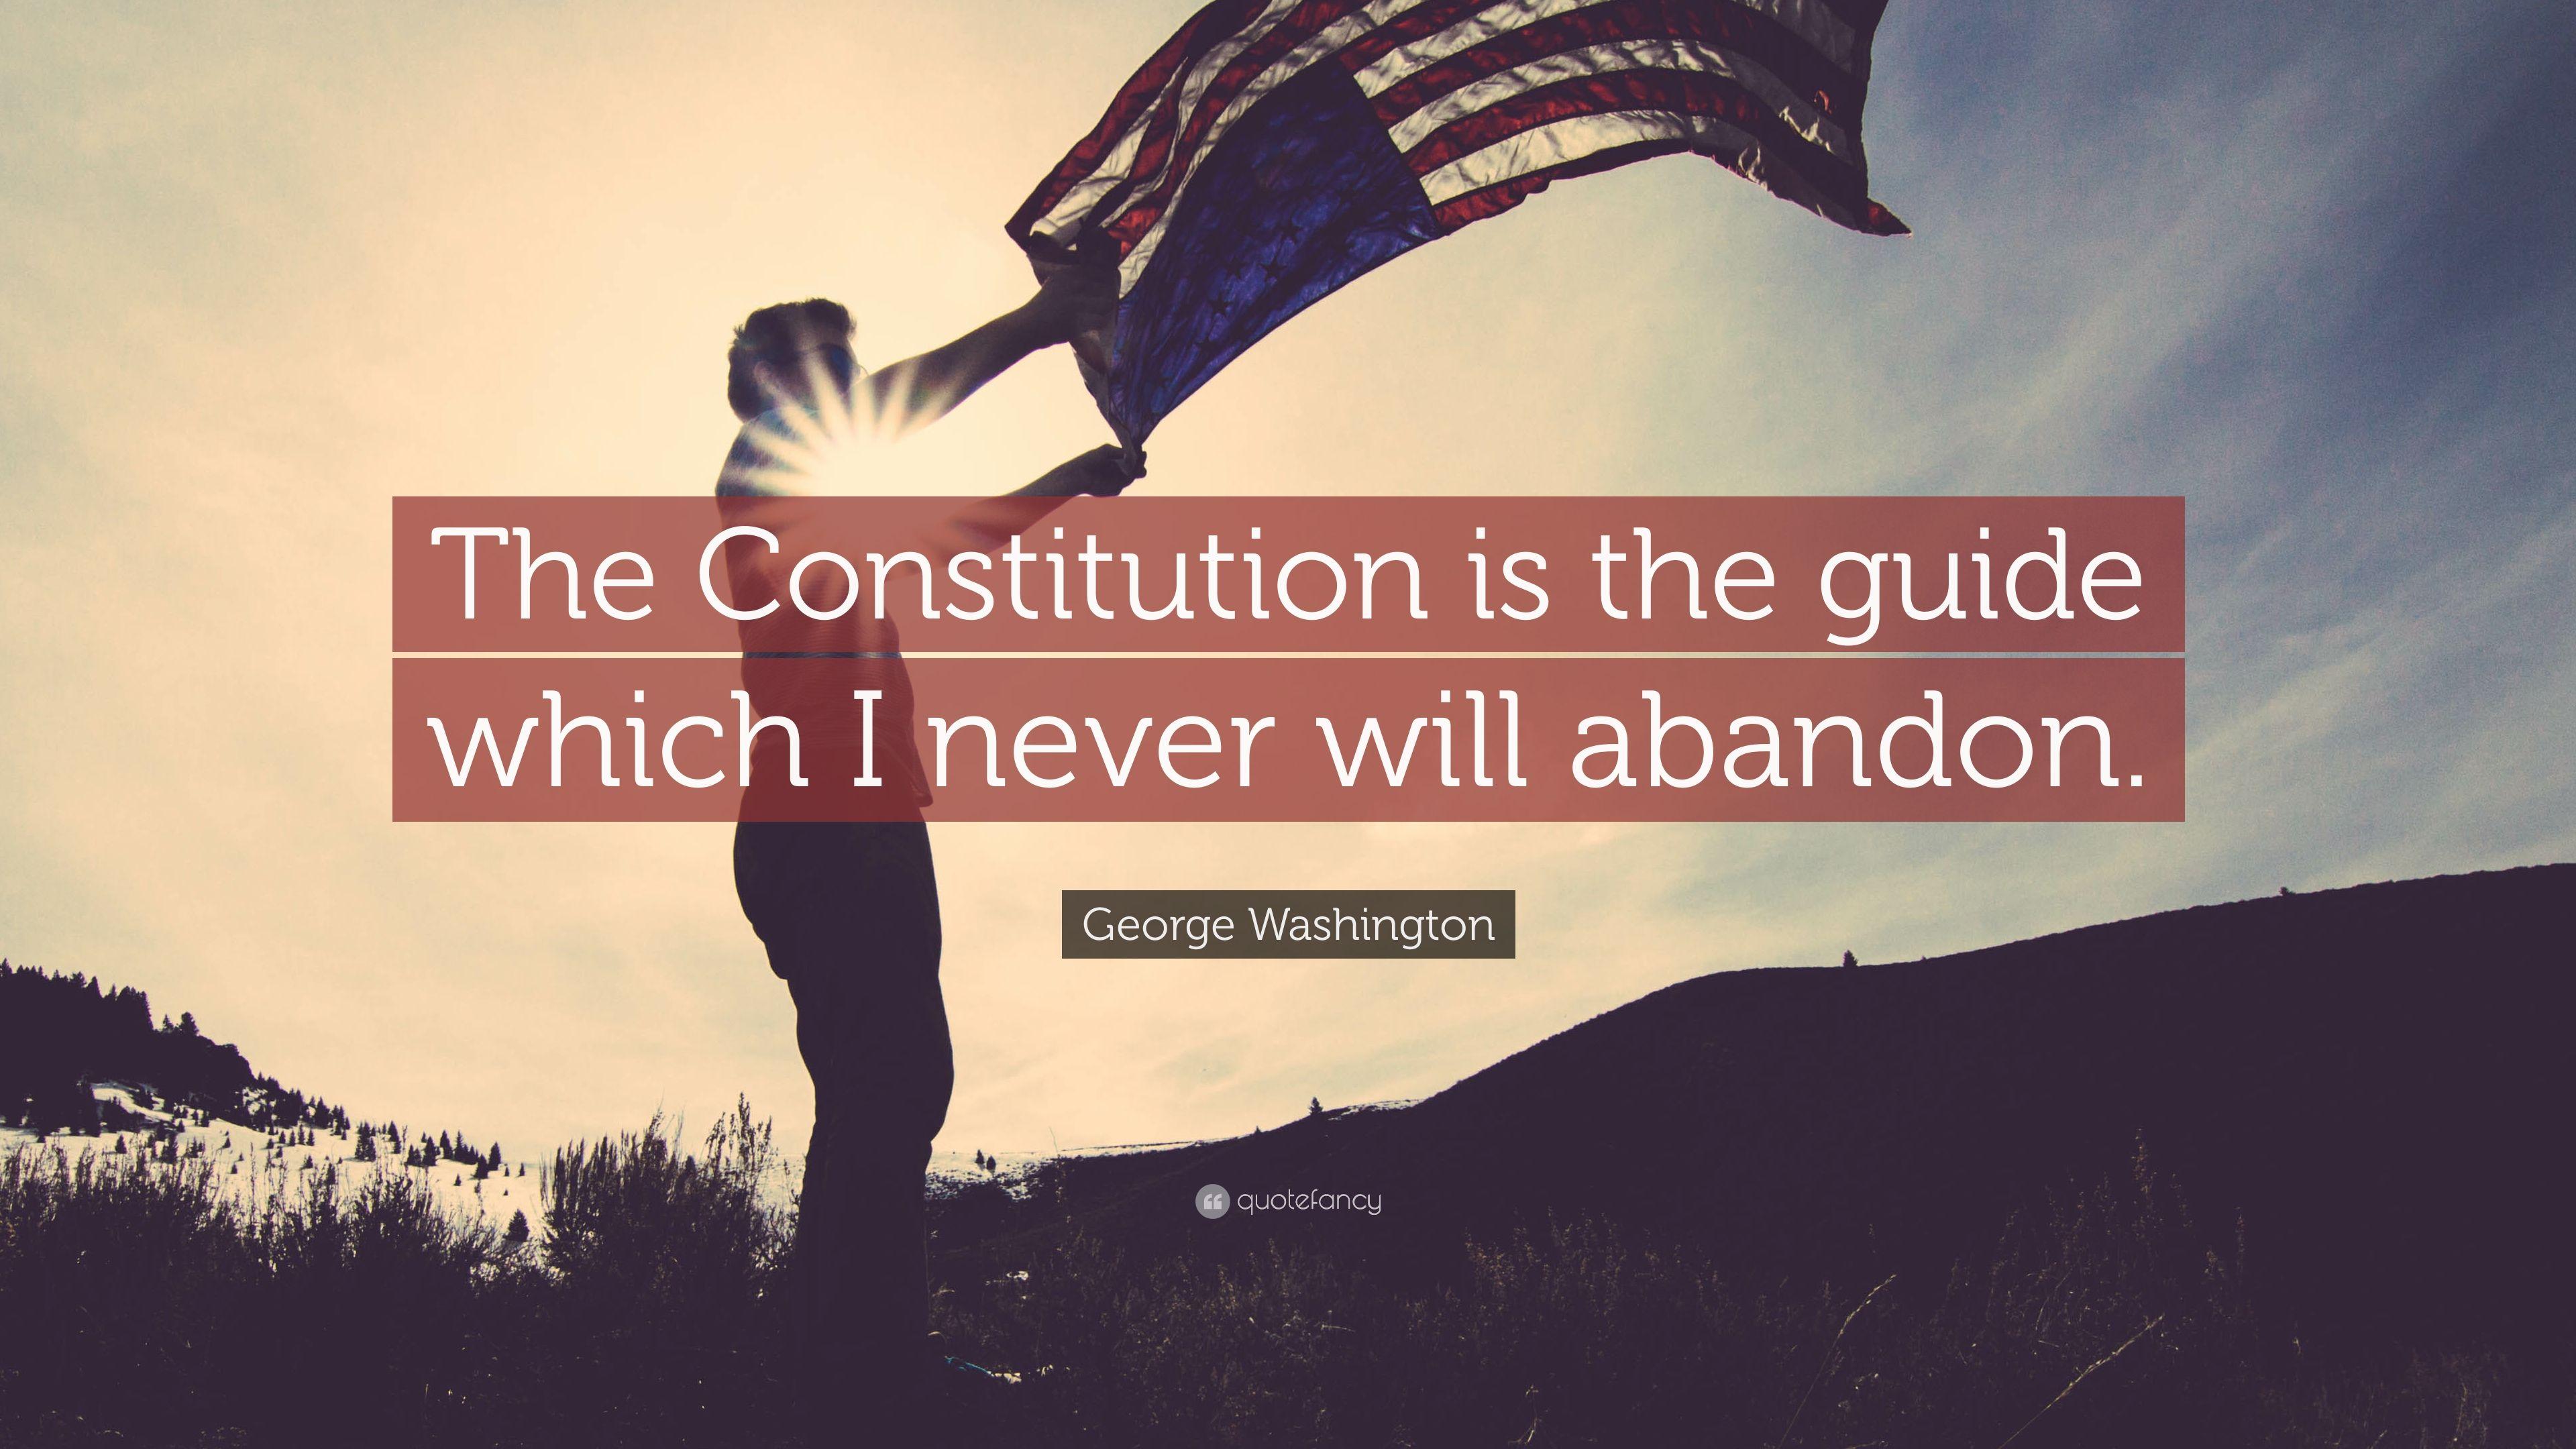 George Washington Quote: “The Constitution is the guide which I